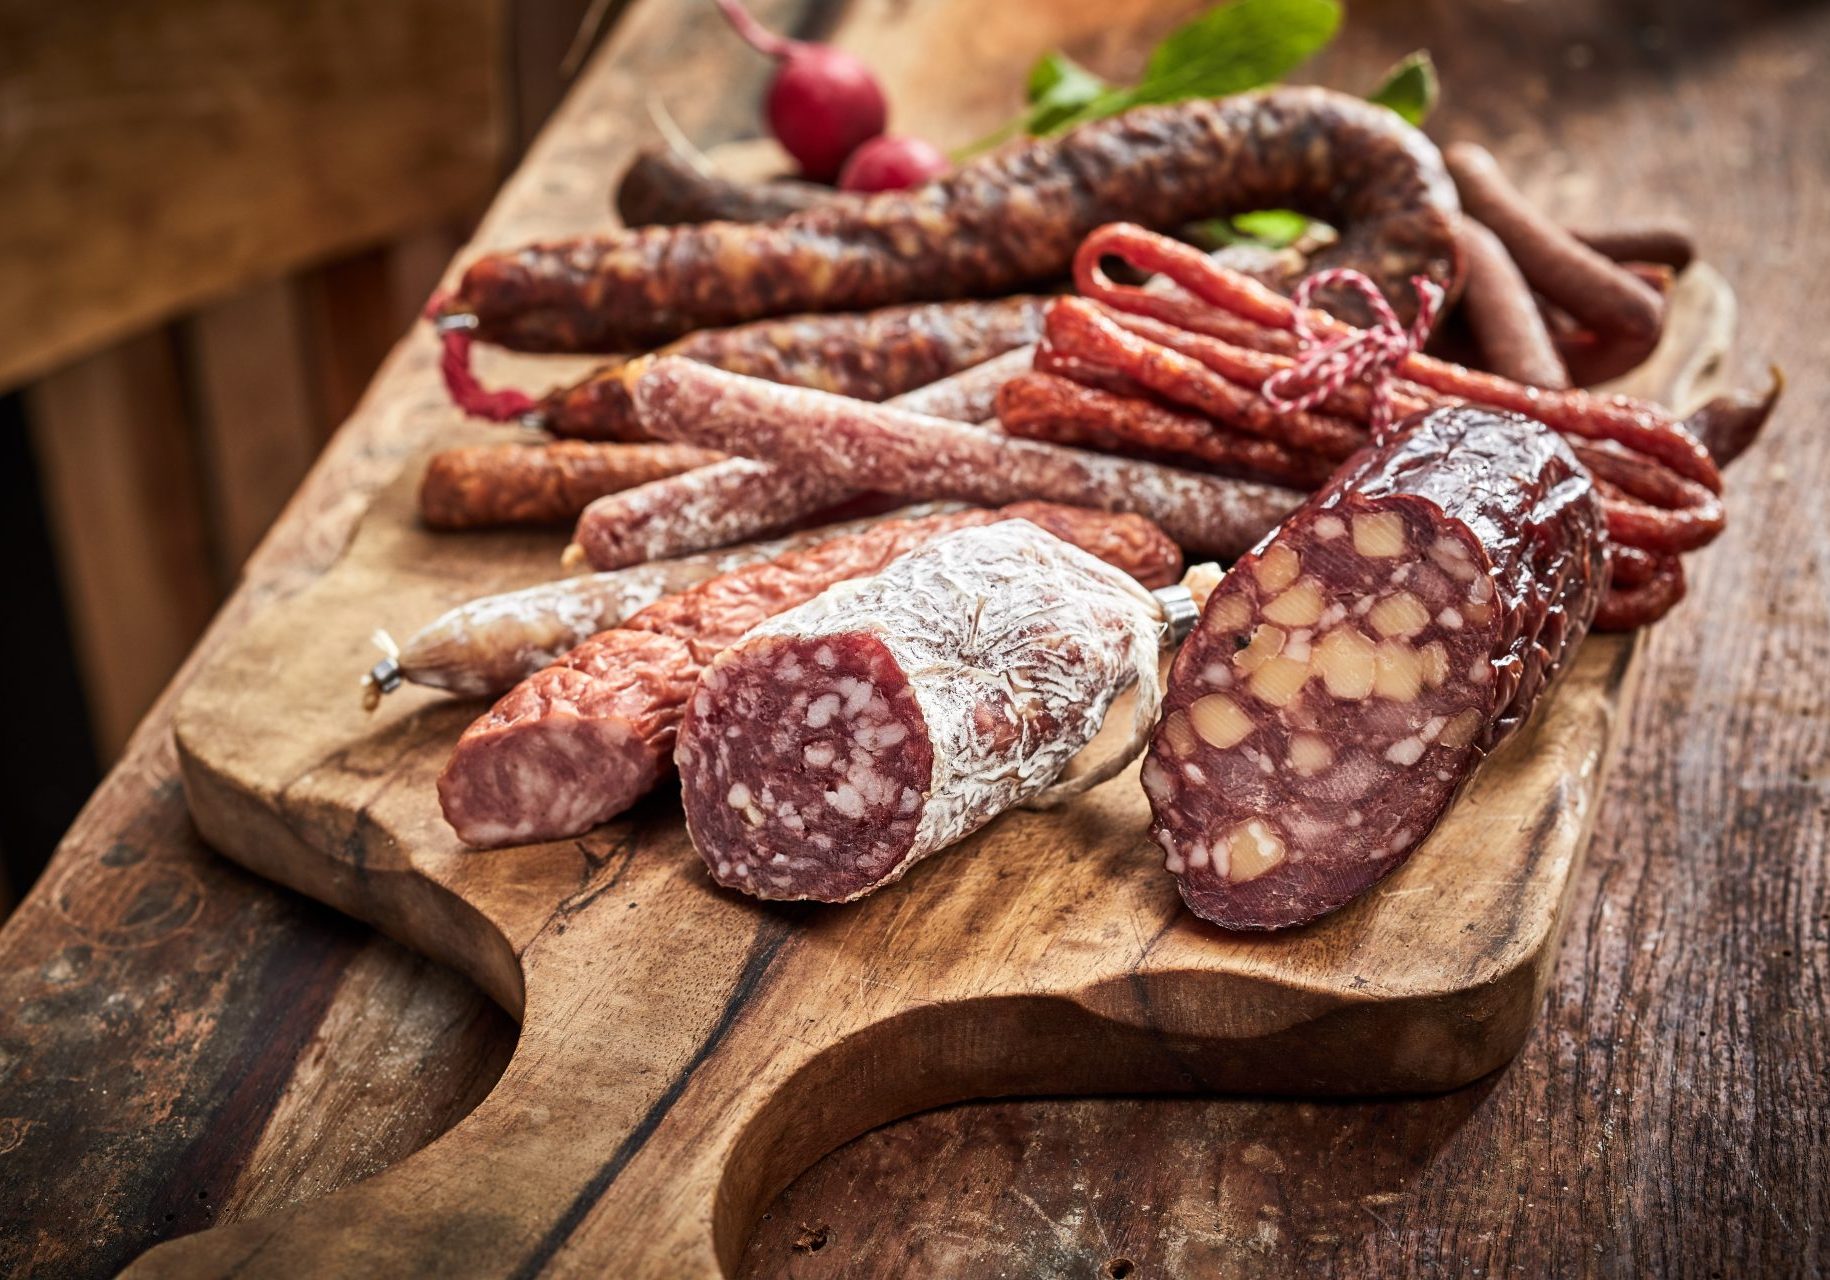 meat and sausages lying on a wooden board